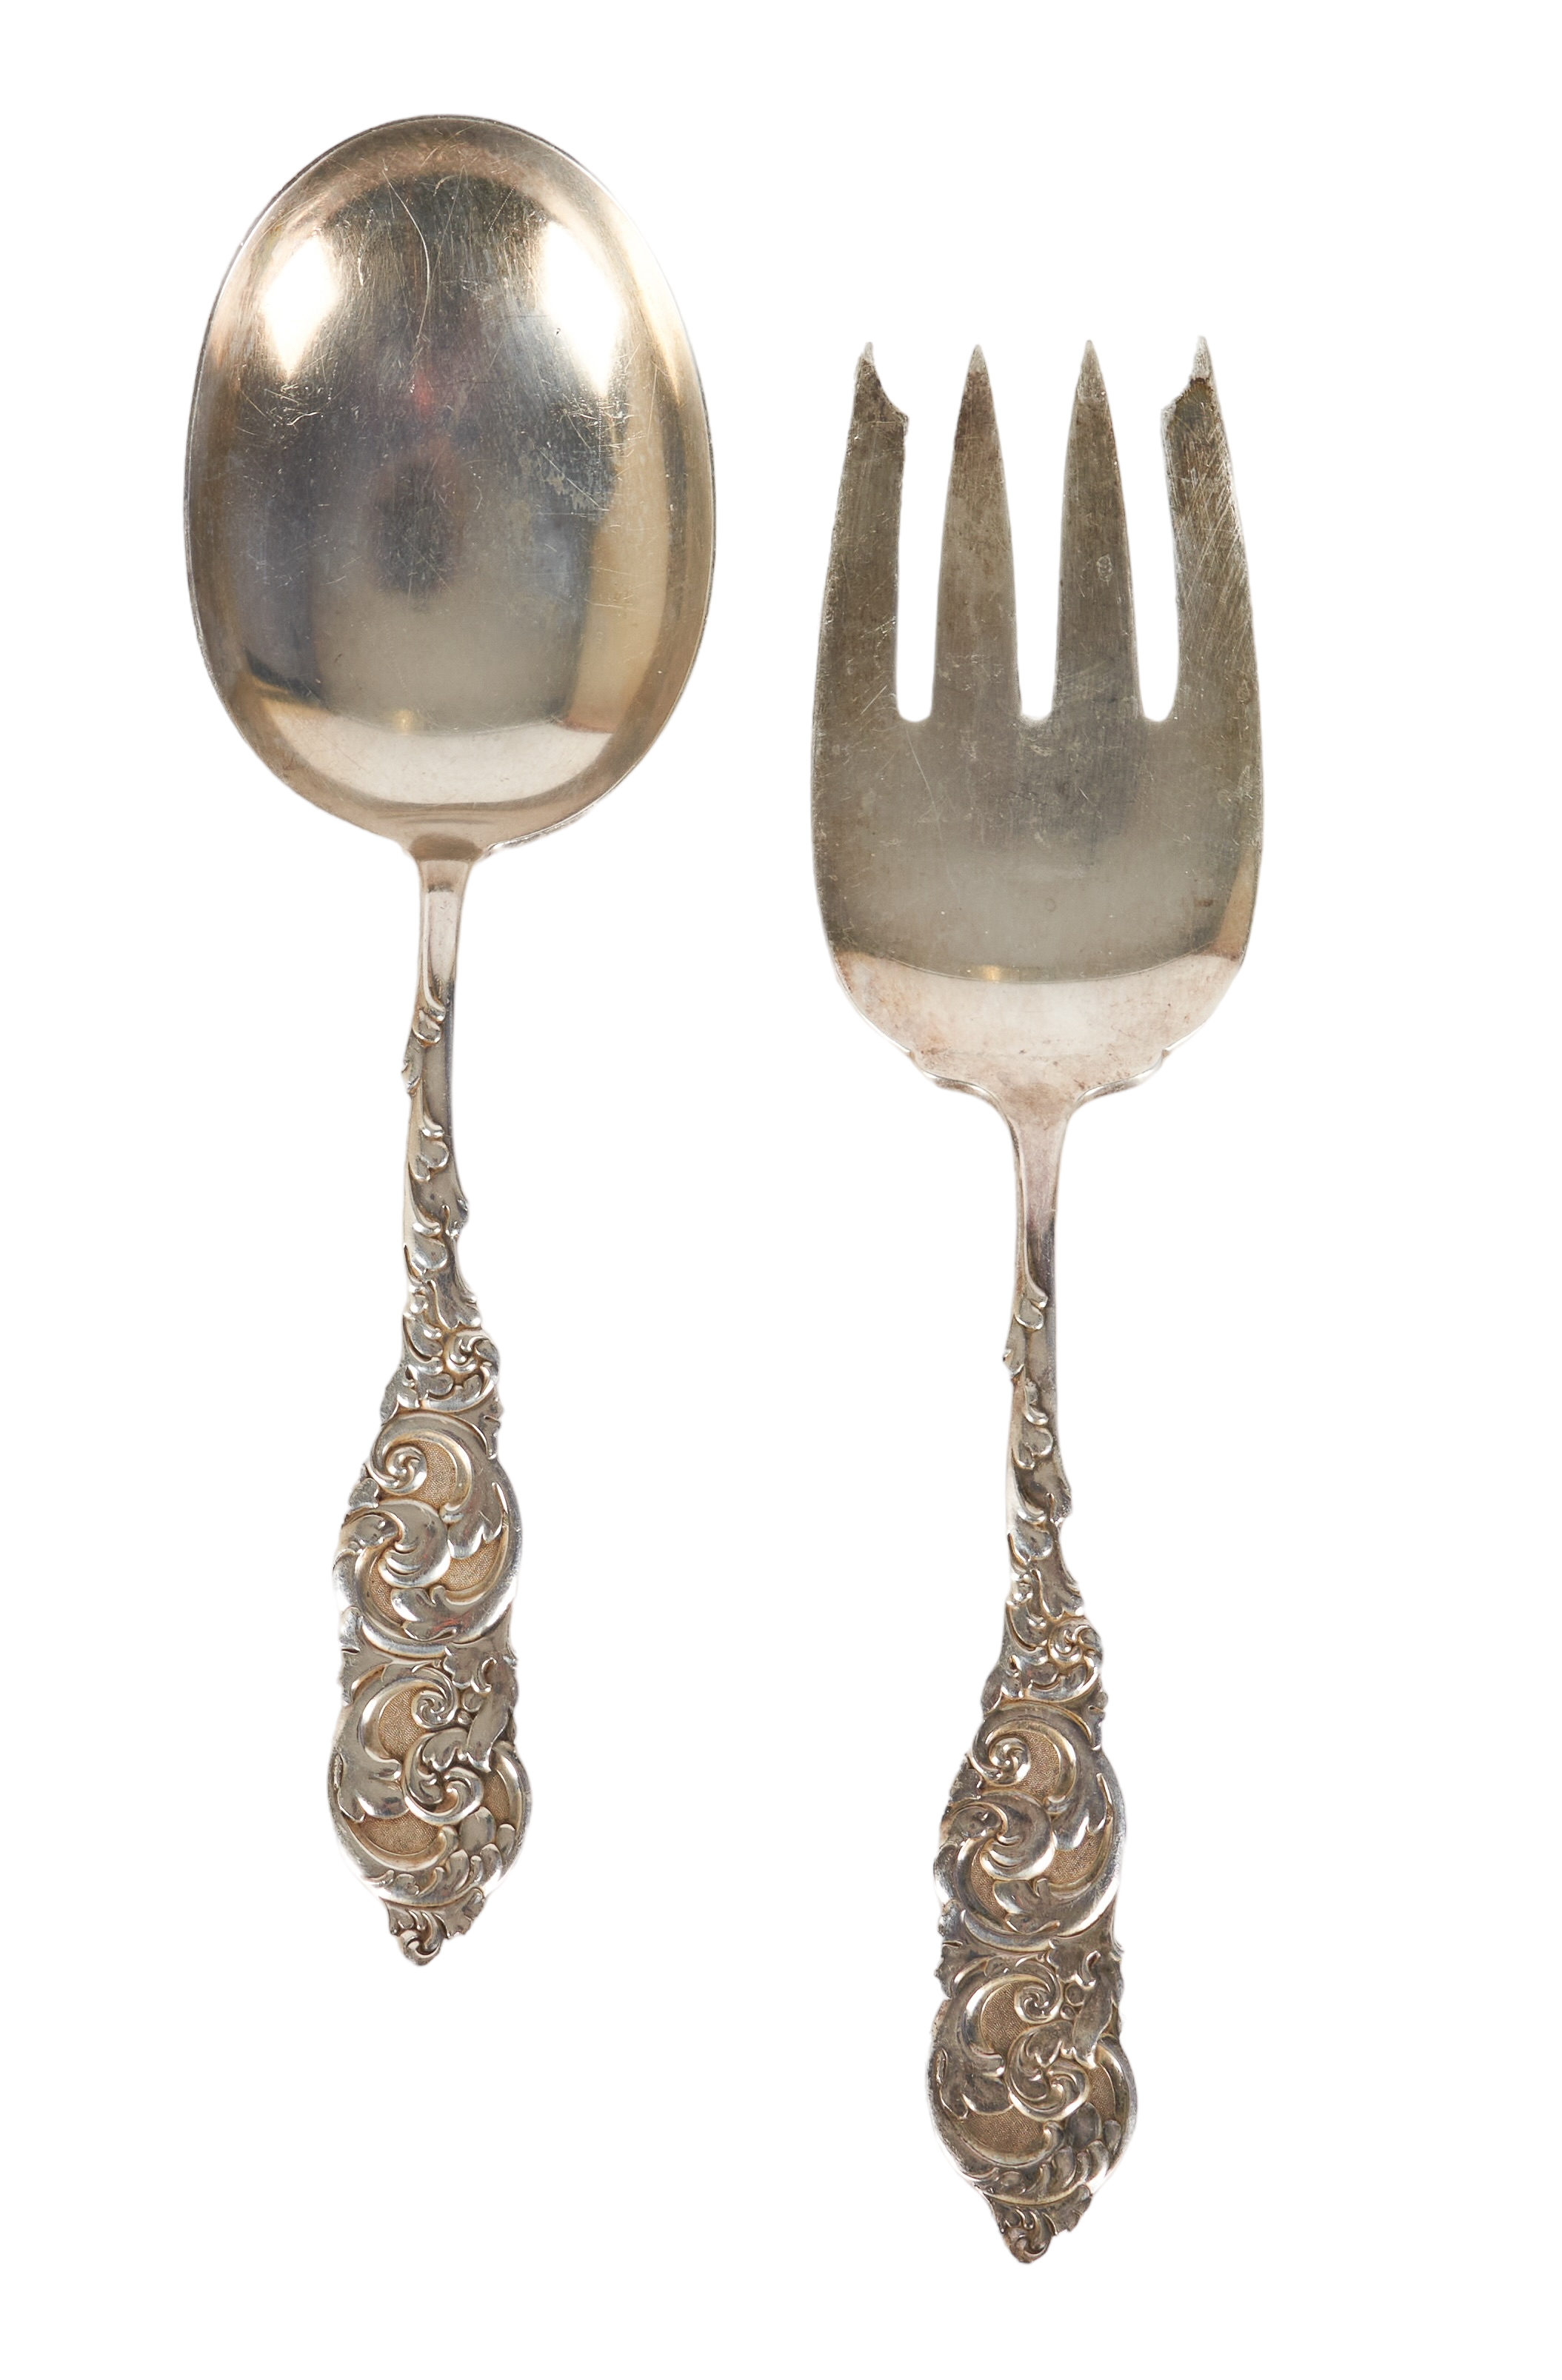 Amston sterling silver serving